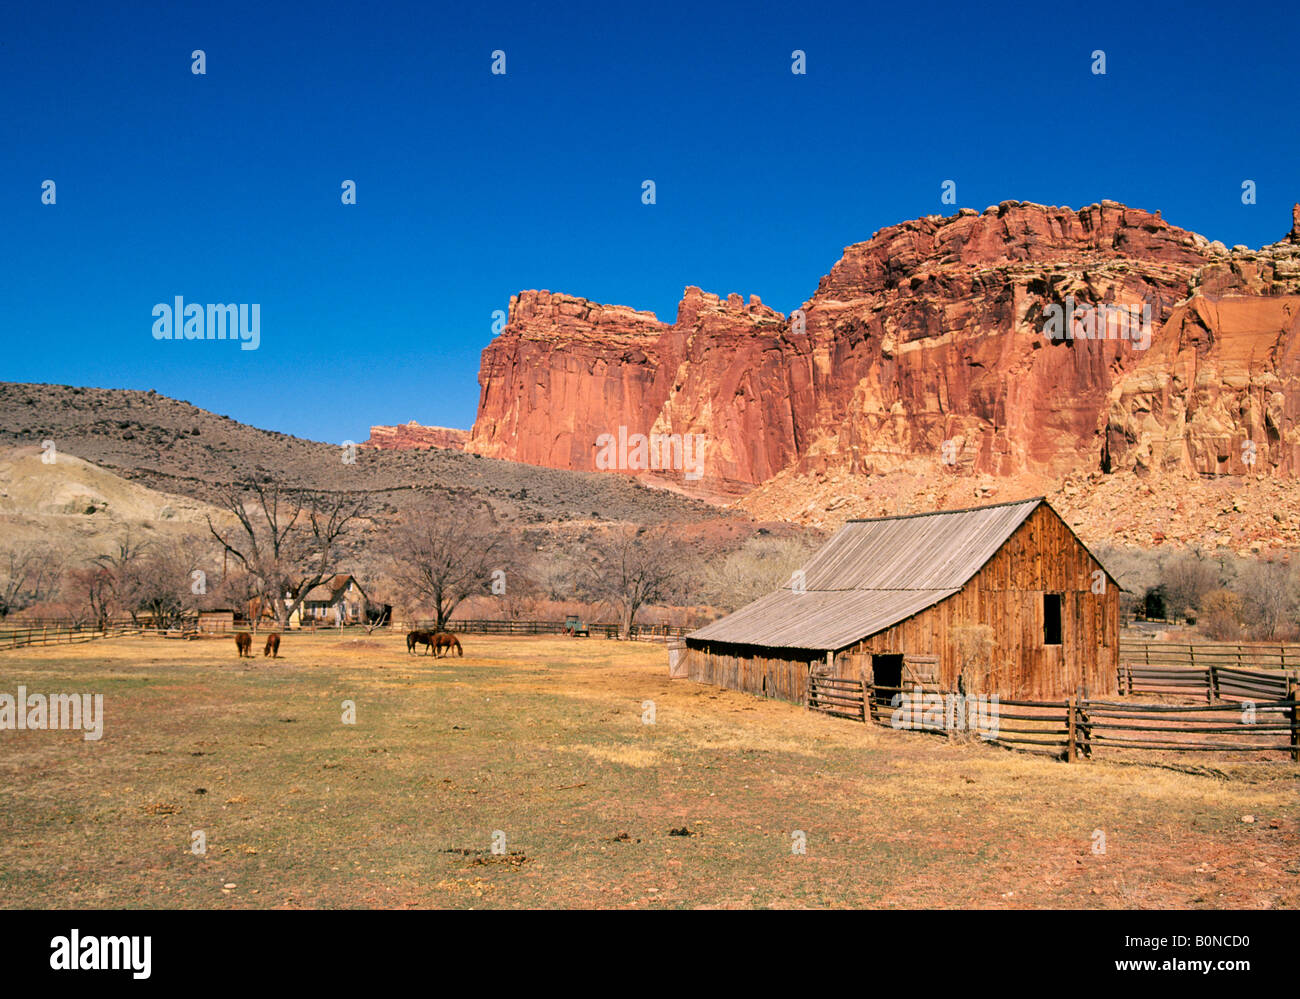 A view of the old Gifford Homestead an early Mormon farm in the Mormon settlement of Fruita in Capitol Reef National Park Stock Photo